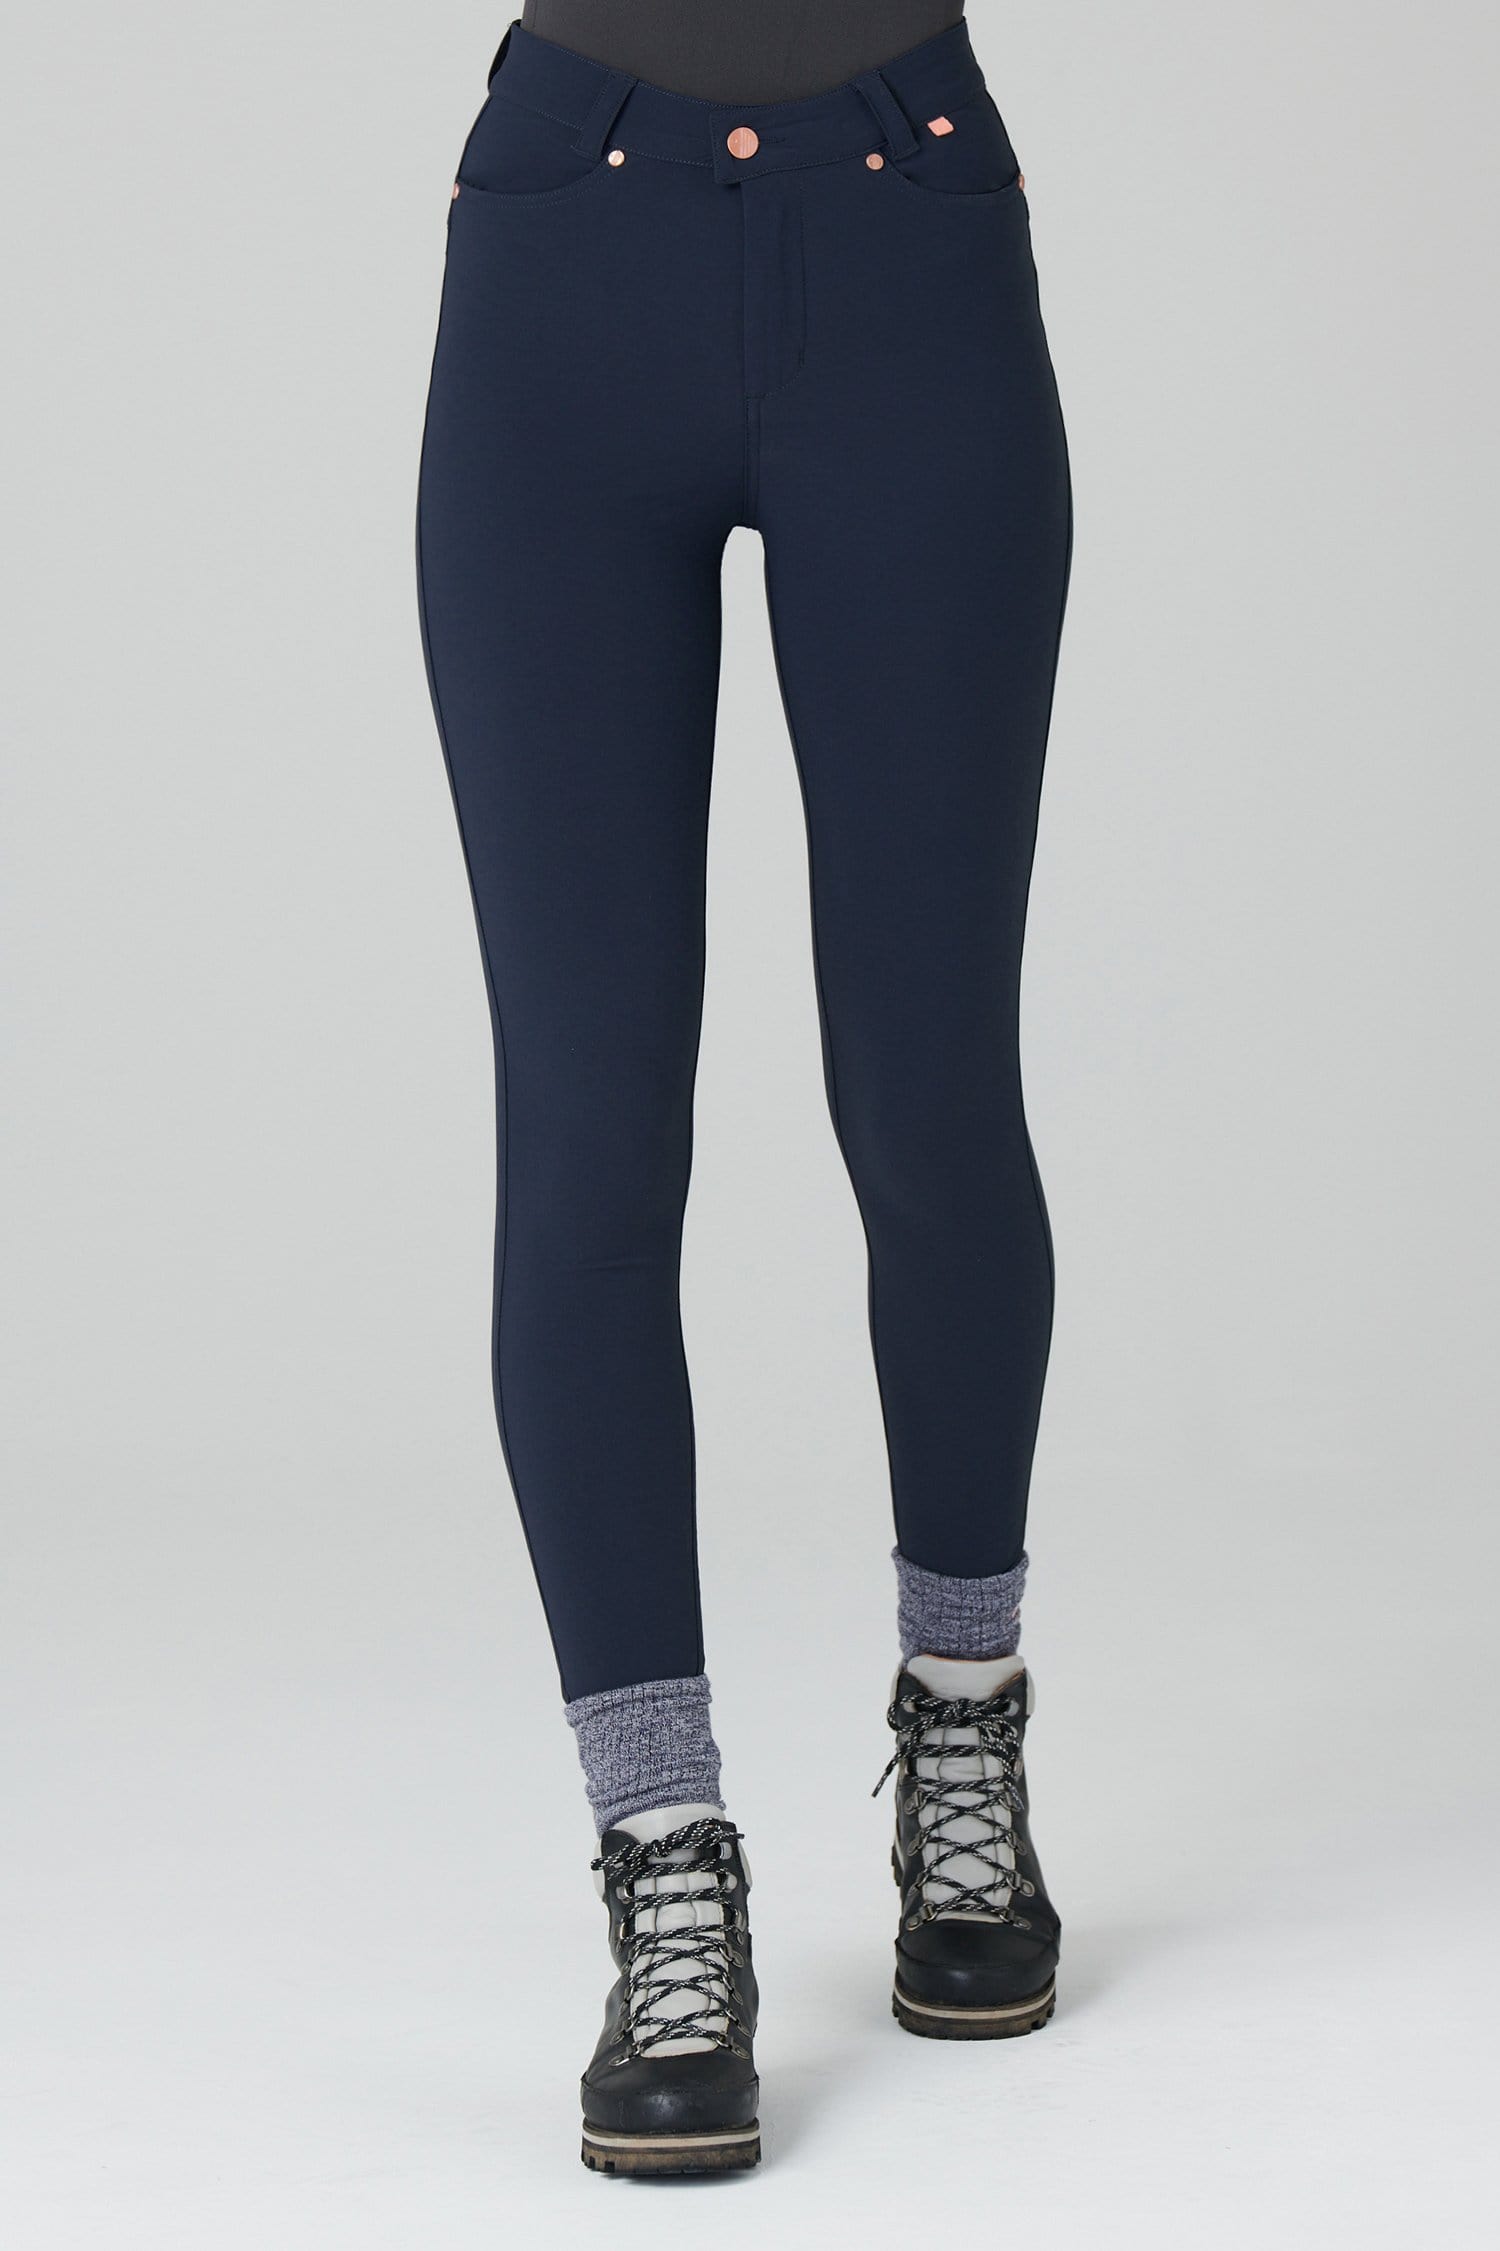 Thermal Skinny Outdoor Trousers - Deep Navy - 30l / Uk12 - Womens - Acai Outdoorwear